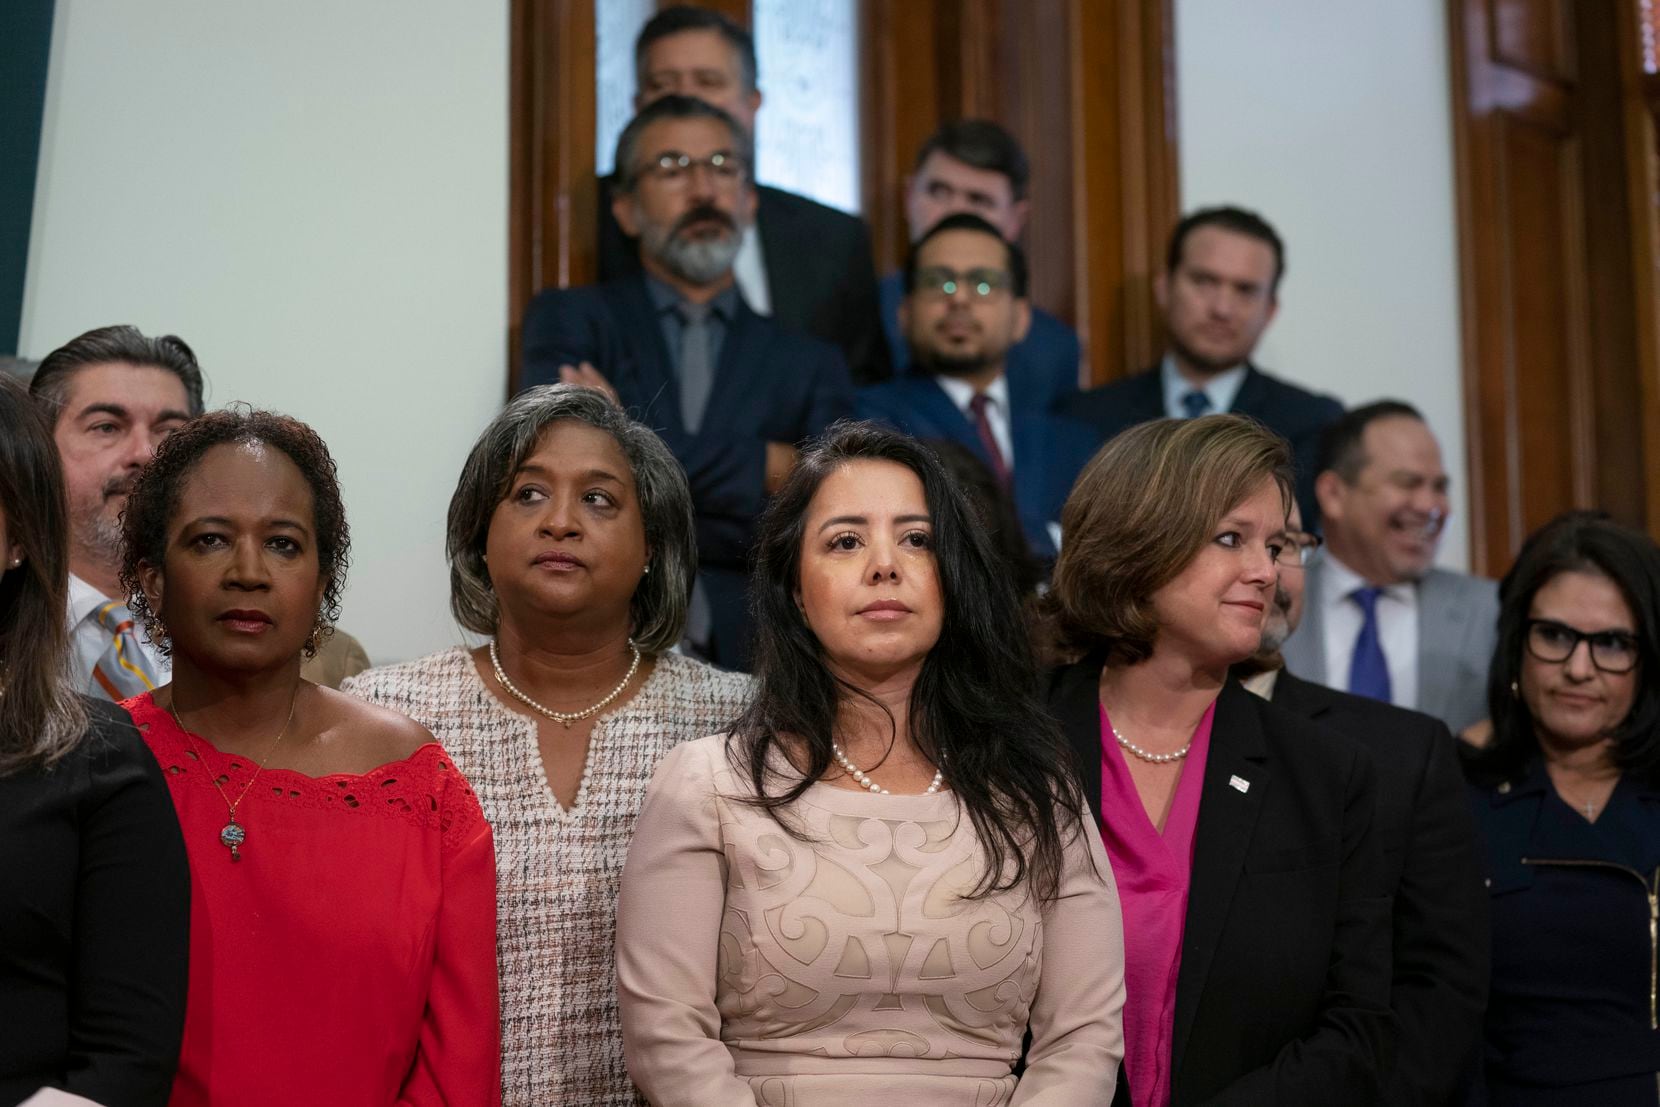 Democratic State Reps. Cheryl Cole, D-Austin, Rhetta Bowers, D-Rowlett, Victoria Neave, D-Dallas, and Re. Ann Johnson, D-Houston, listen to the press conference on the first day of the special session on July 8, 2021. (Bob Daemmrich/CapitolPressPhoto)